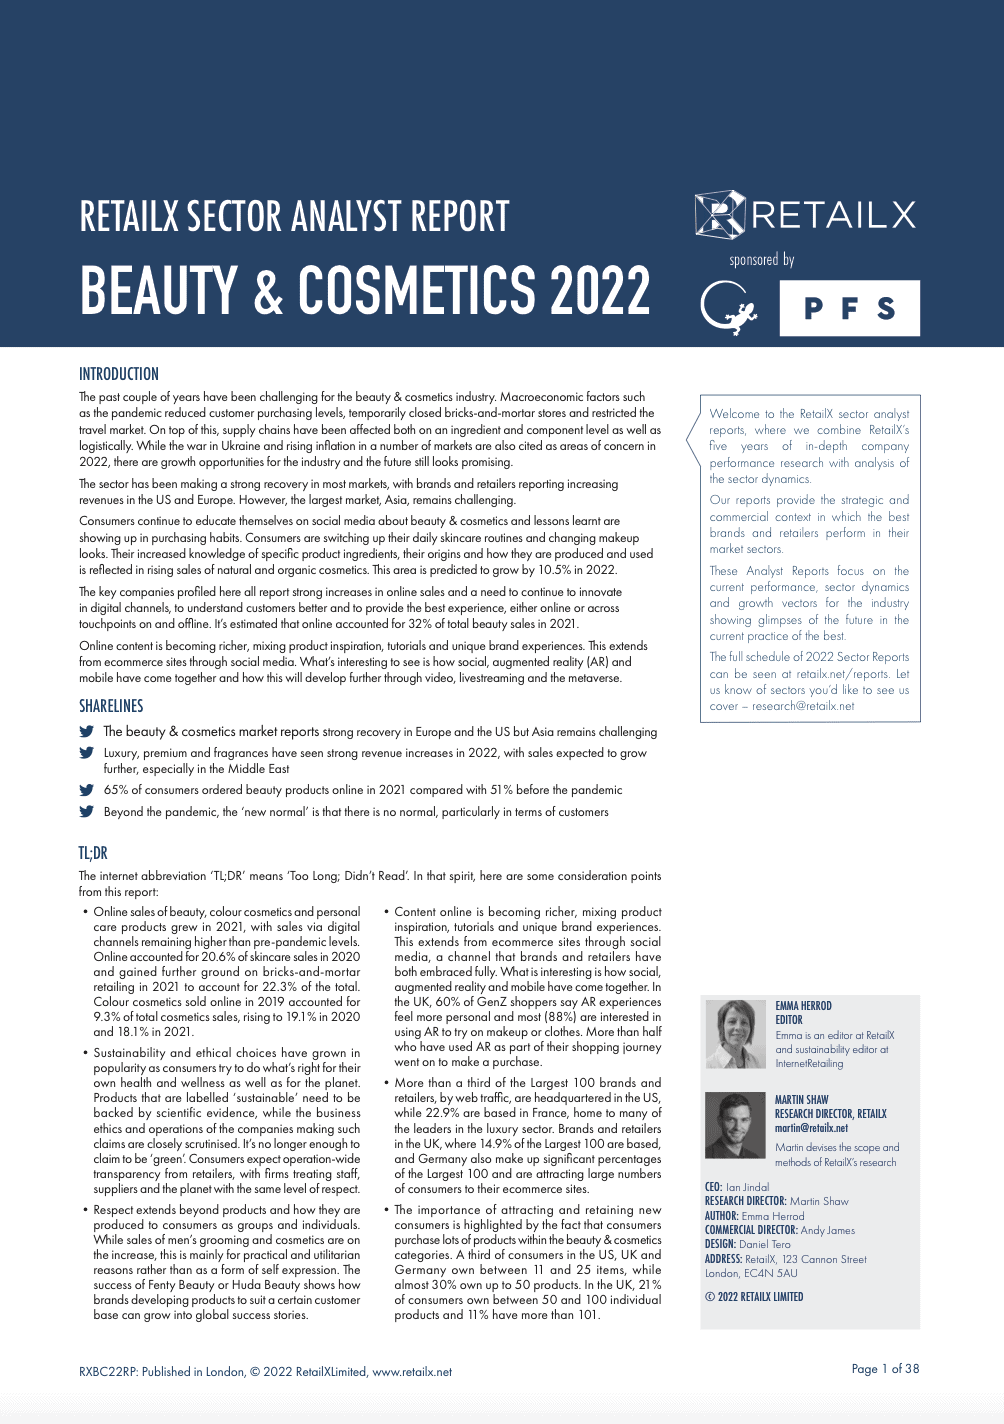 RetailX Sector Analyst Report: Beauty & Cosmetics 2022